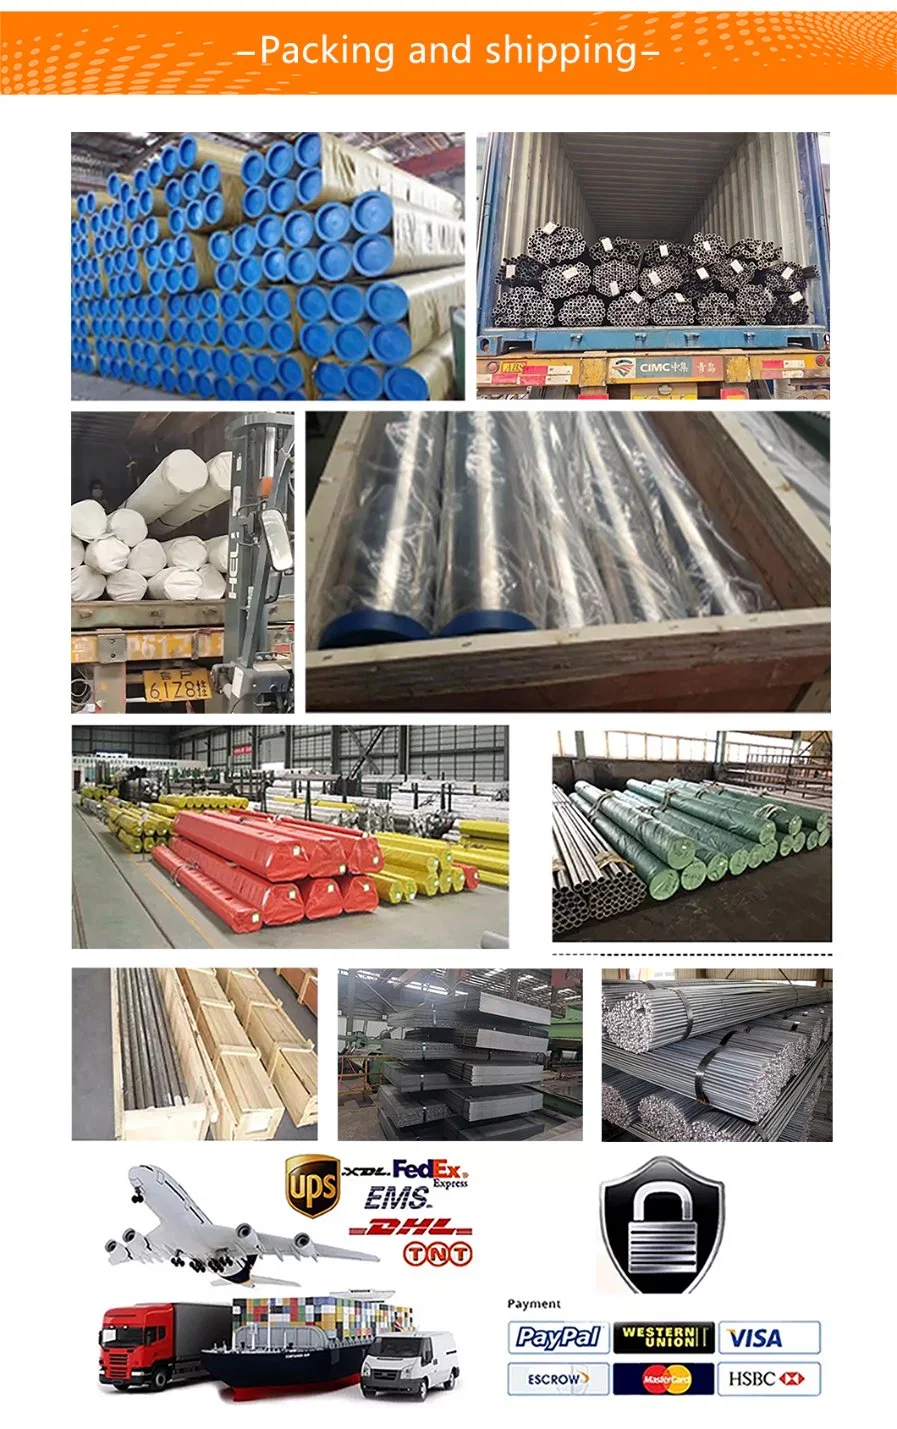 AISI Factory Price High Quality 2mm 3mm 6mm 16mm 20mm 22mm Iron Steel Rod Mild Steel Round Bar Steel